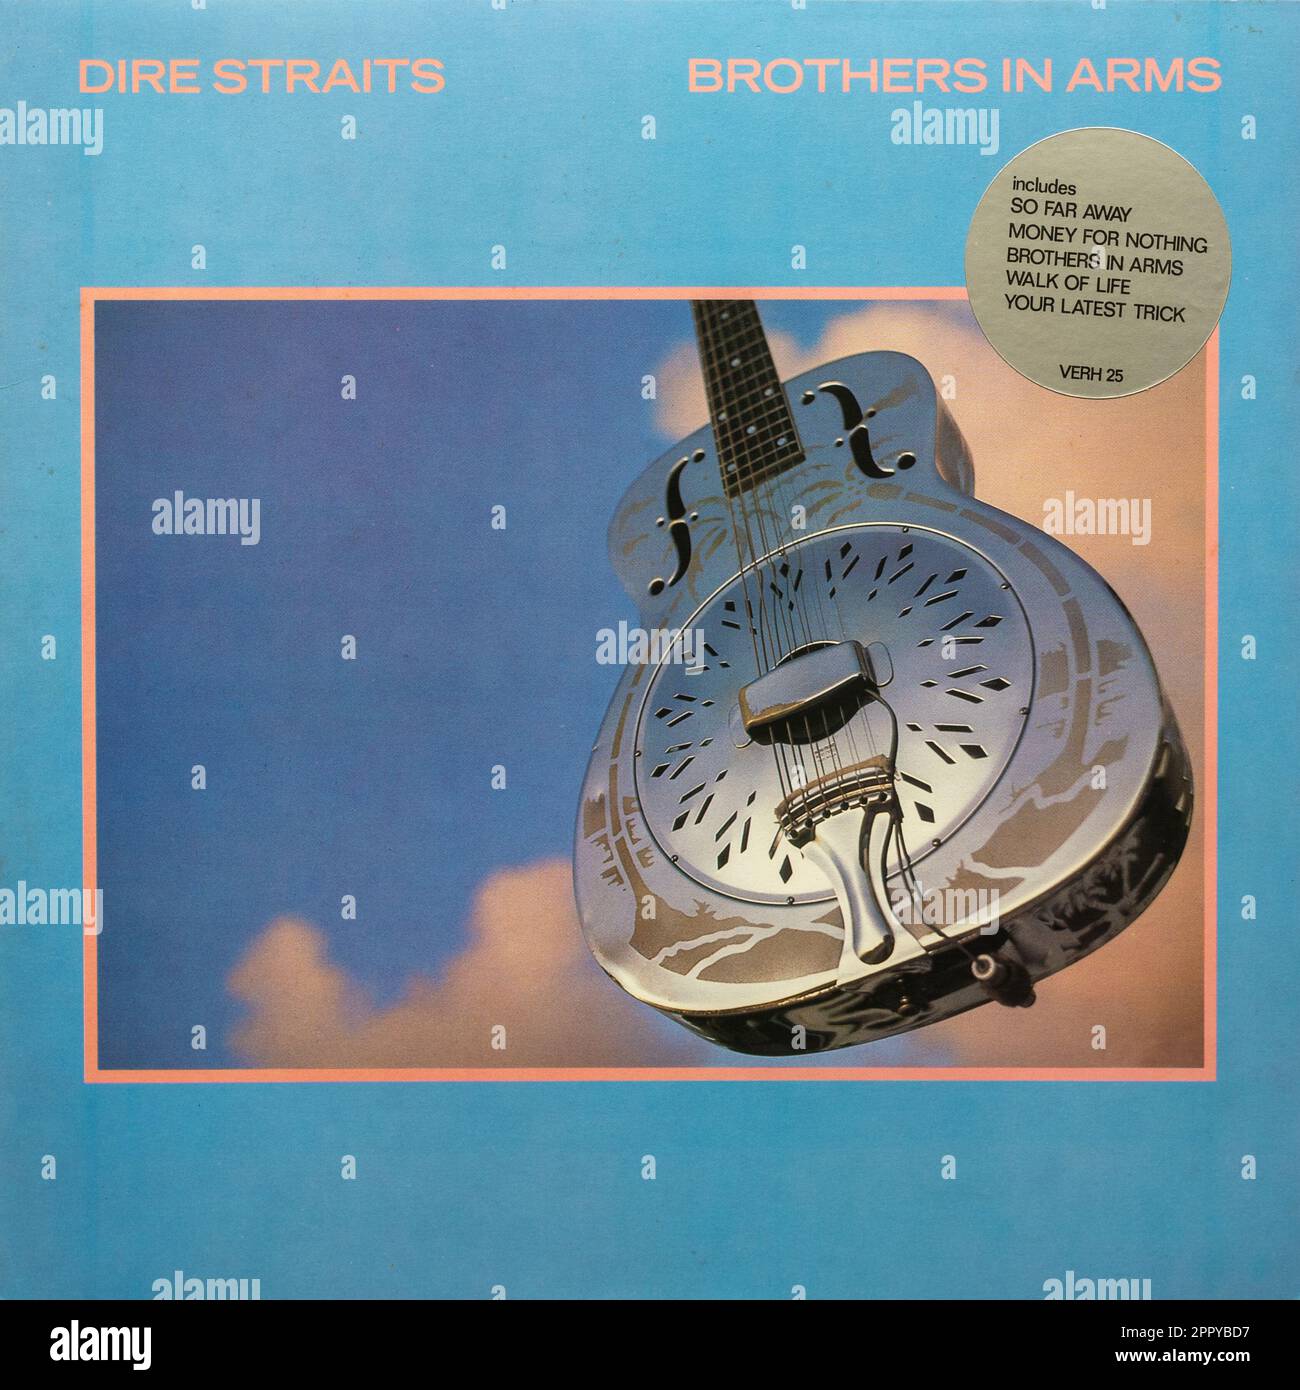 Brothers in Arms vinyl album record cover by Dire Straits, British rock band, UK Stock Photo